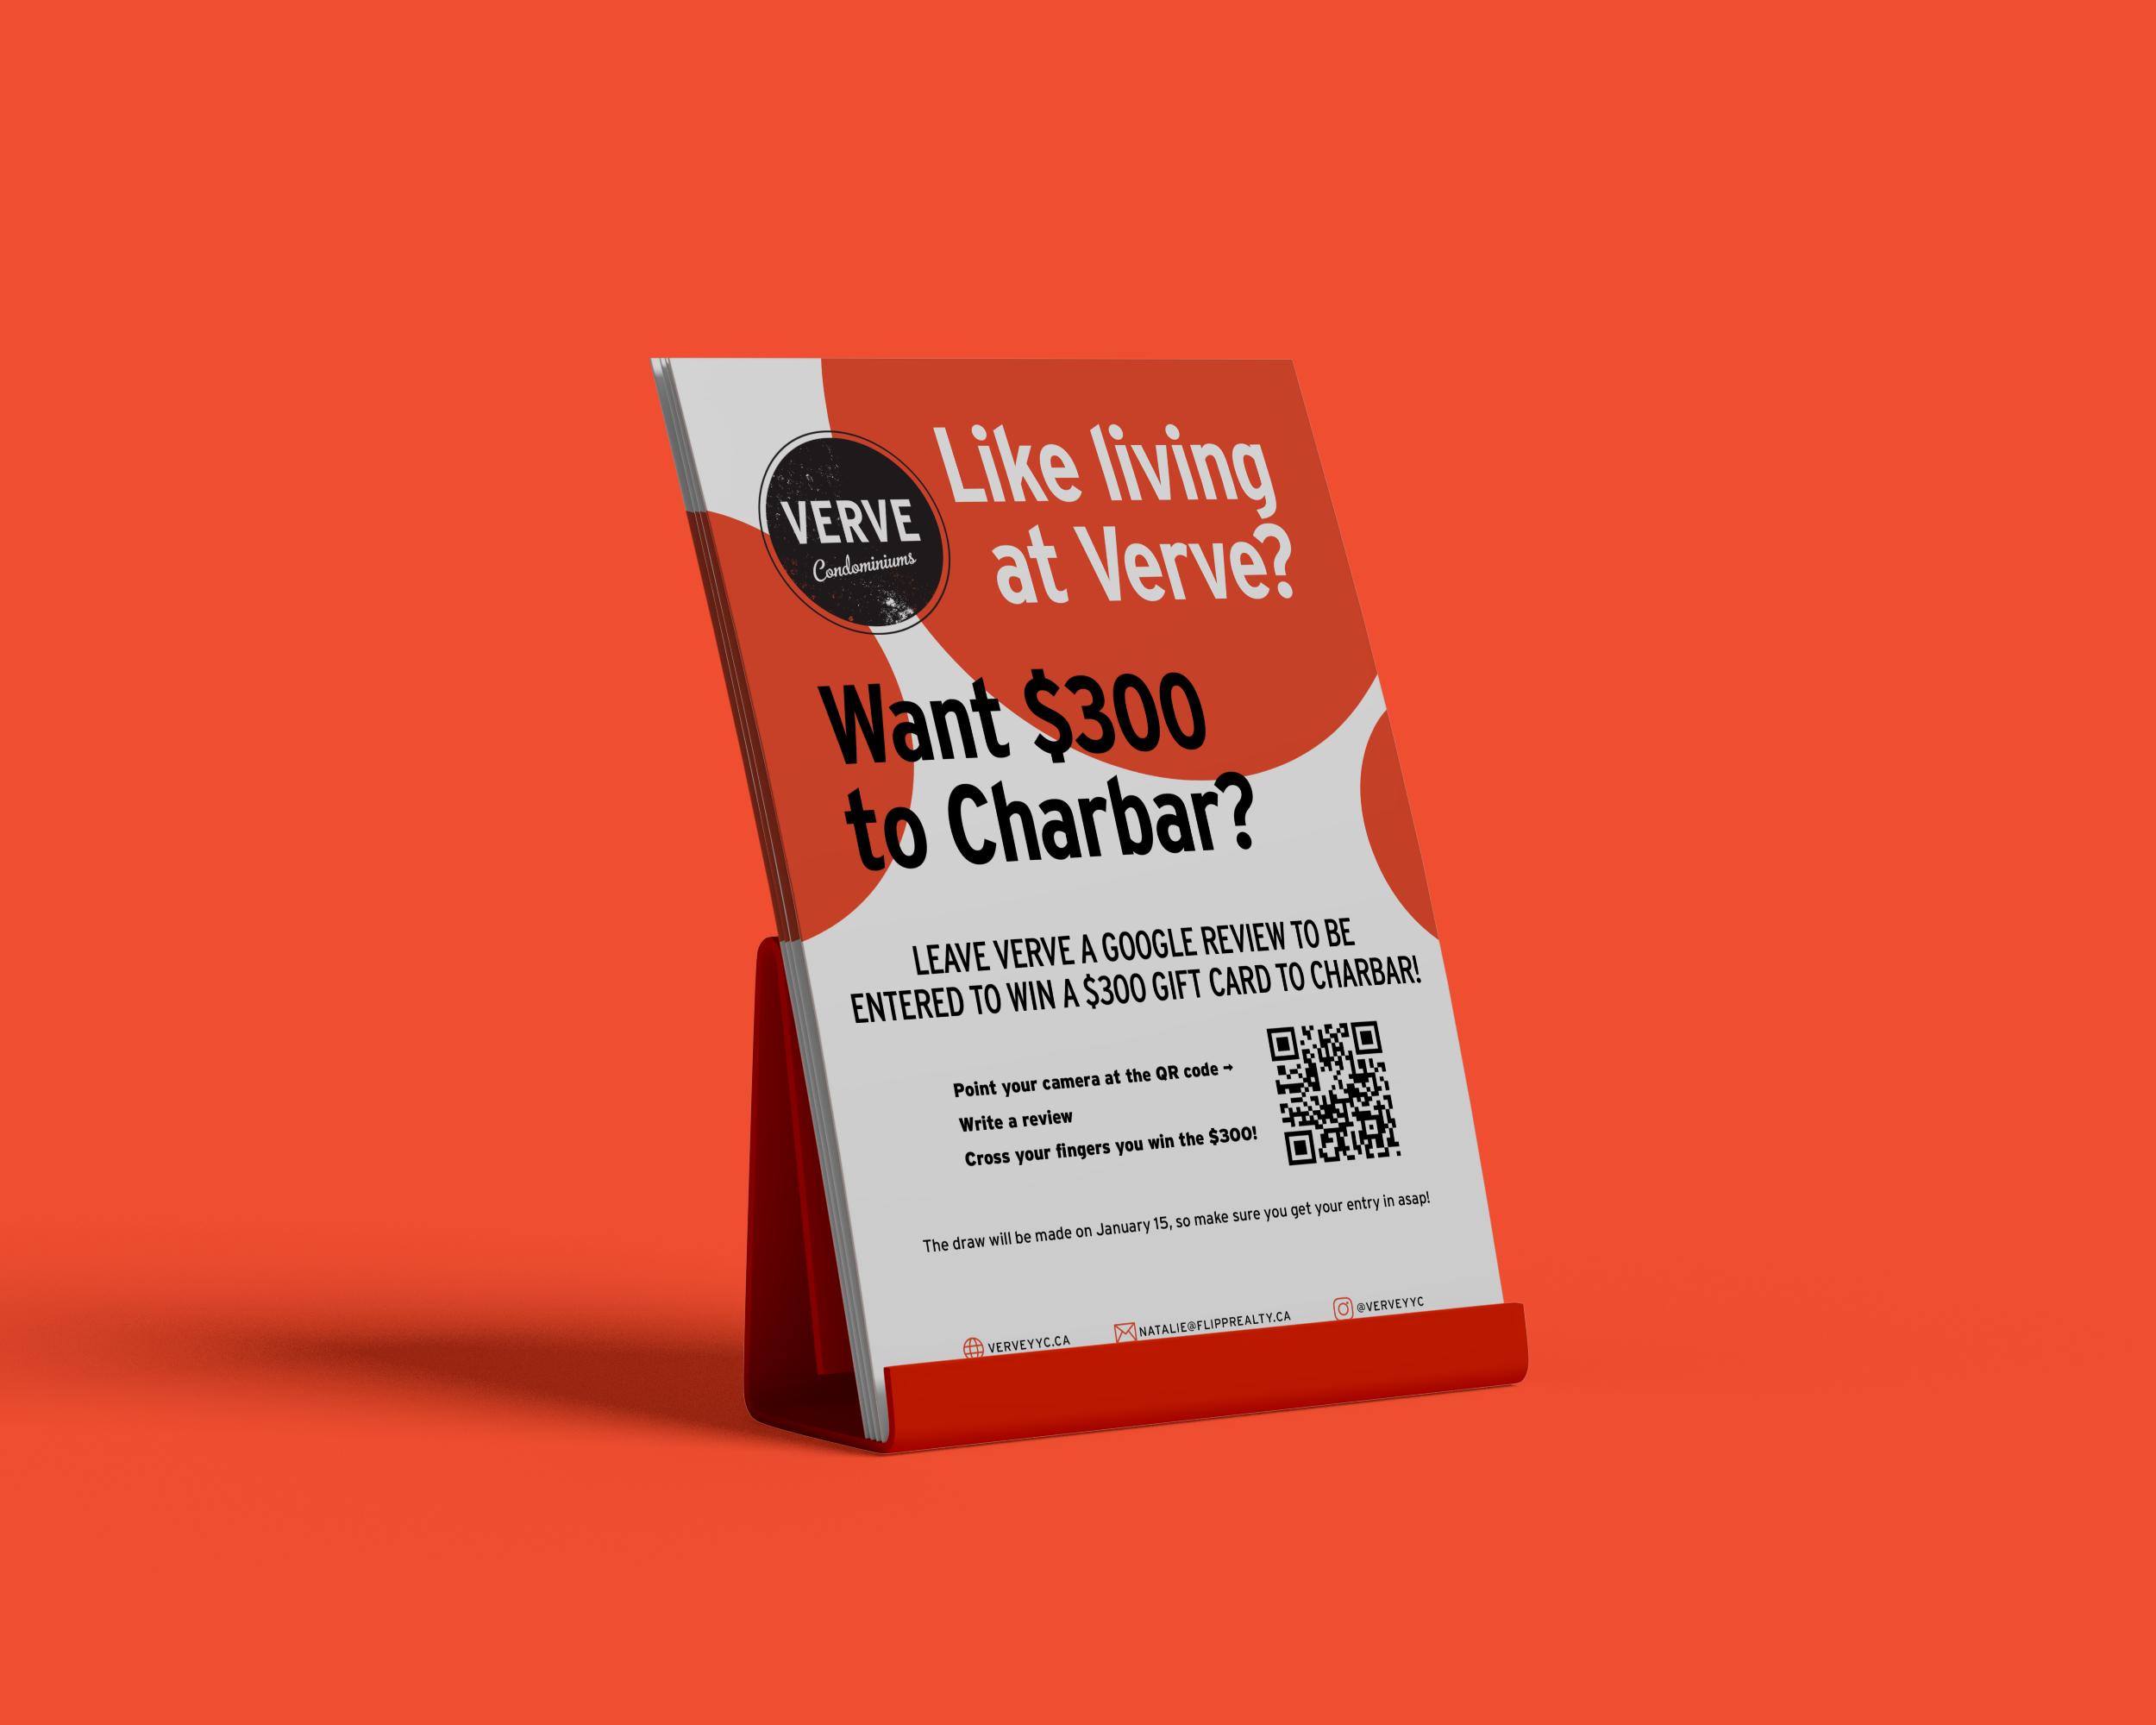 Contest tent card to win $300 at Charbar